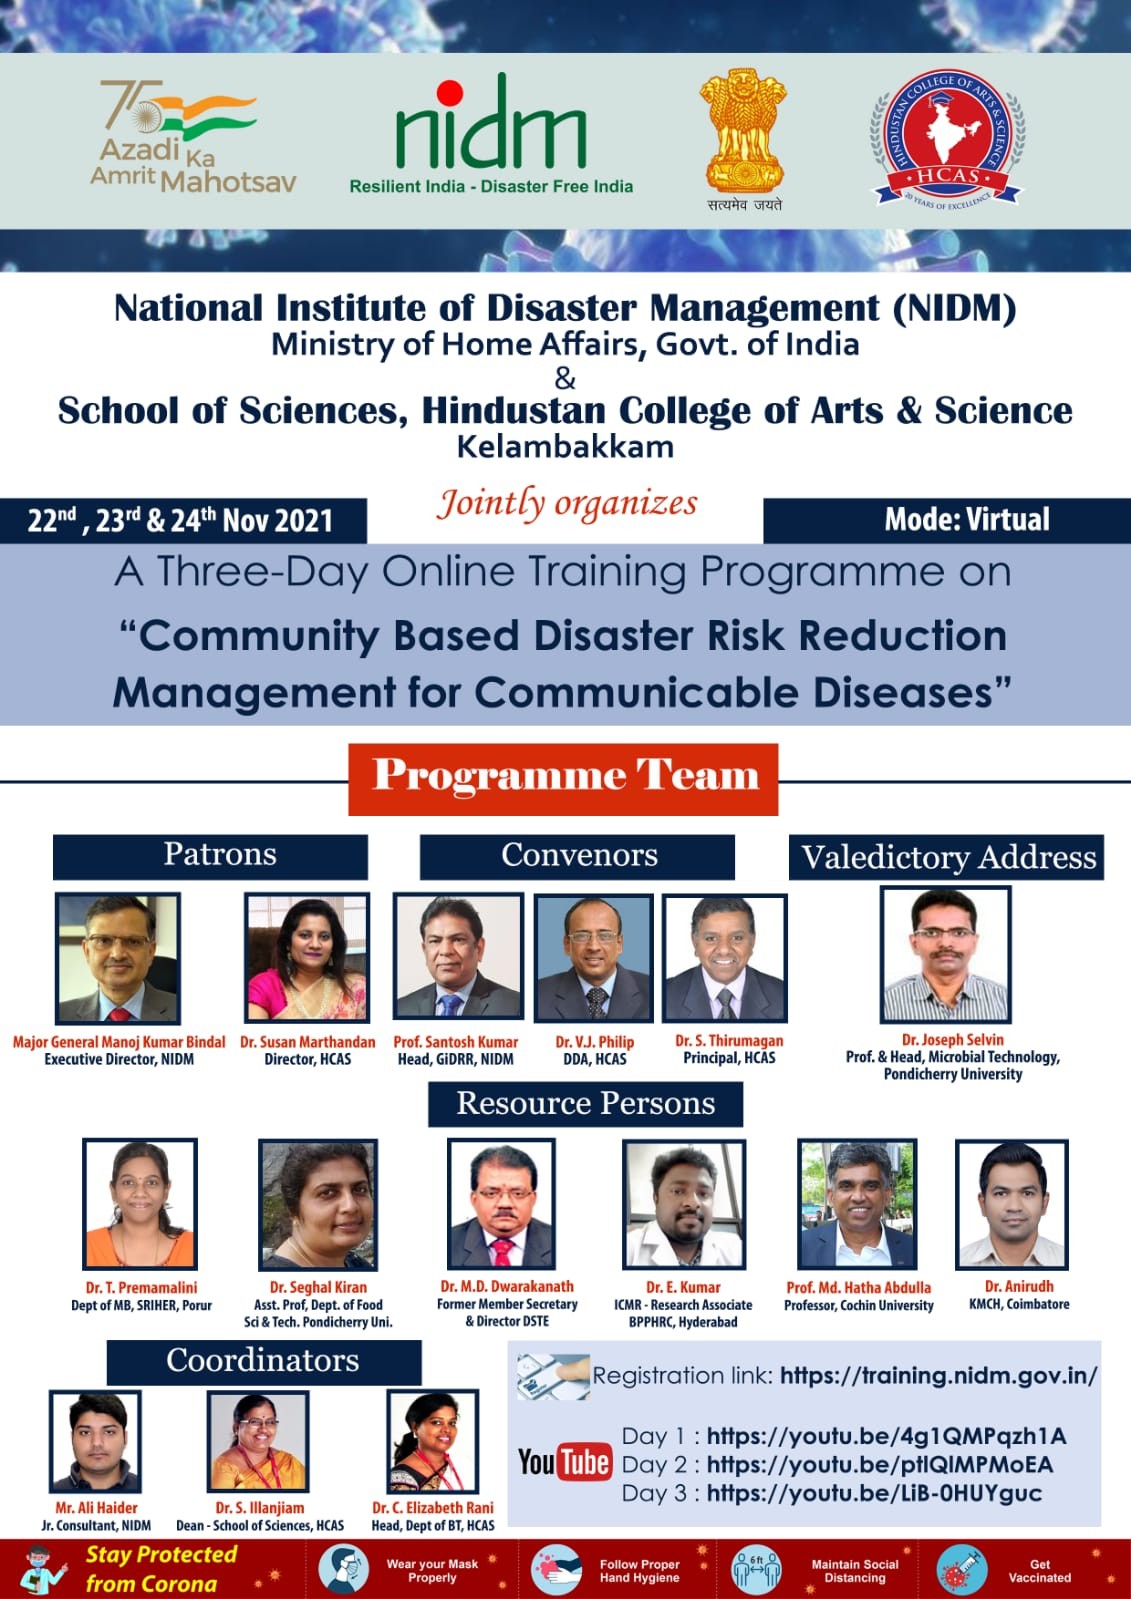 Community Based Disaster Risk Reduction Management for Communicable Diseases